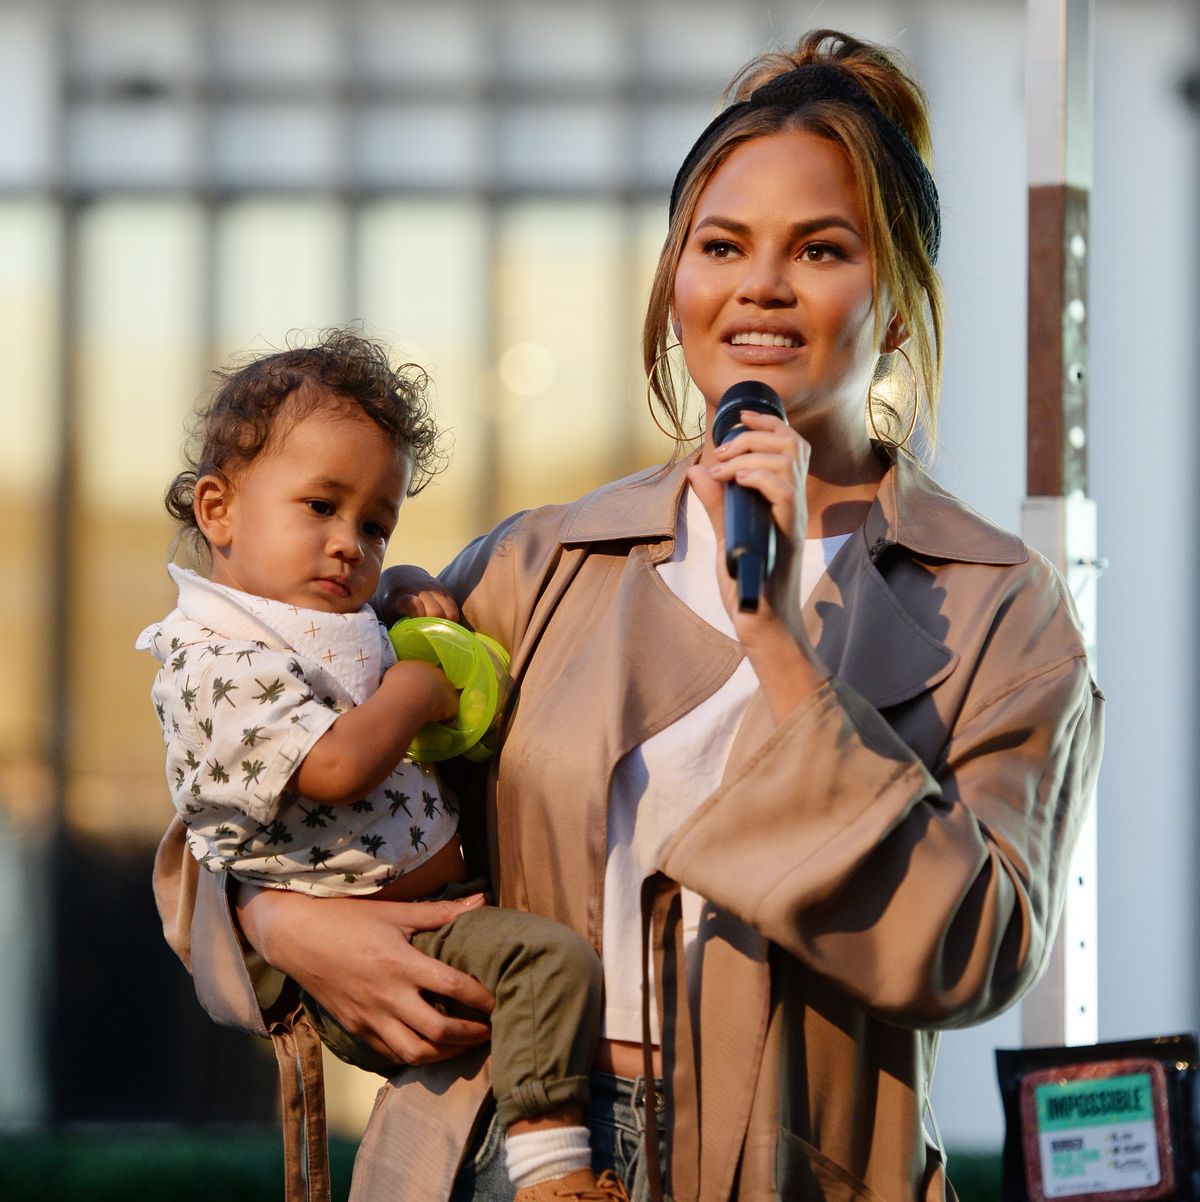 Impossible Foods Grocery Los Angeles Launch With "Pepper Thai" Teigen